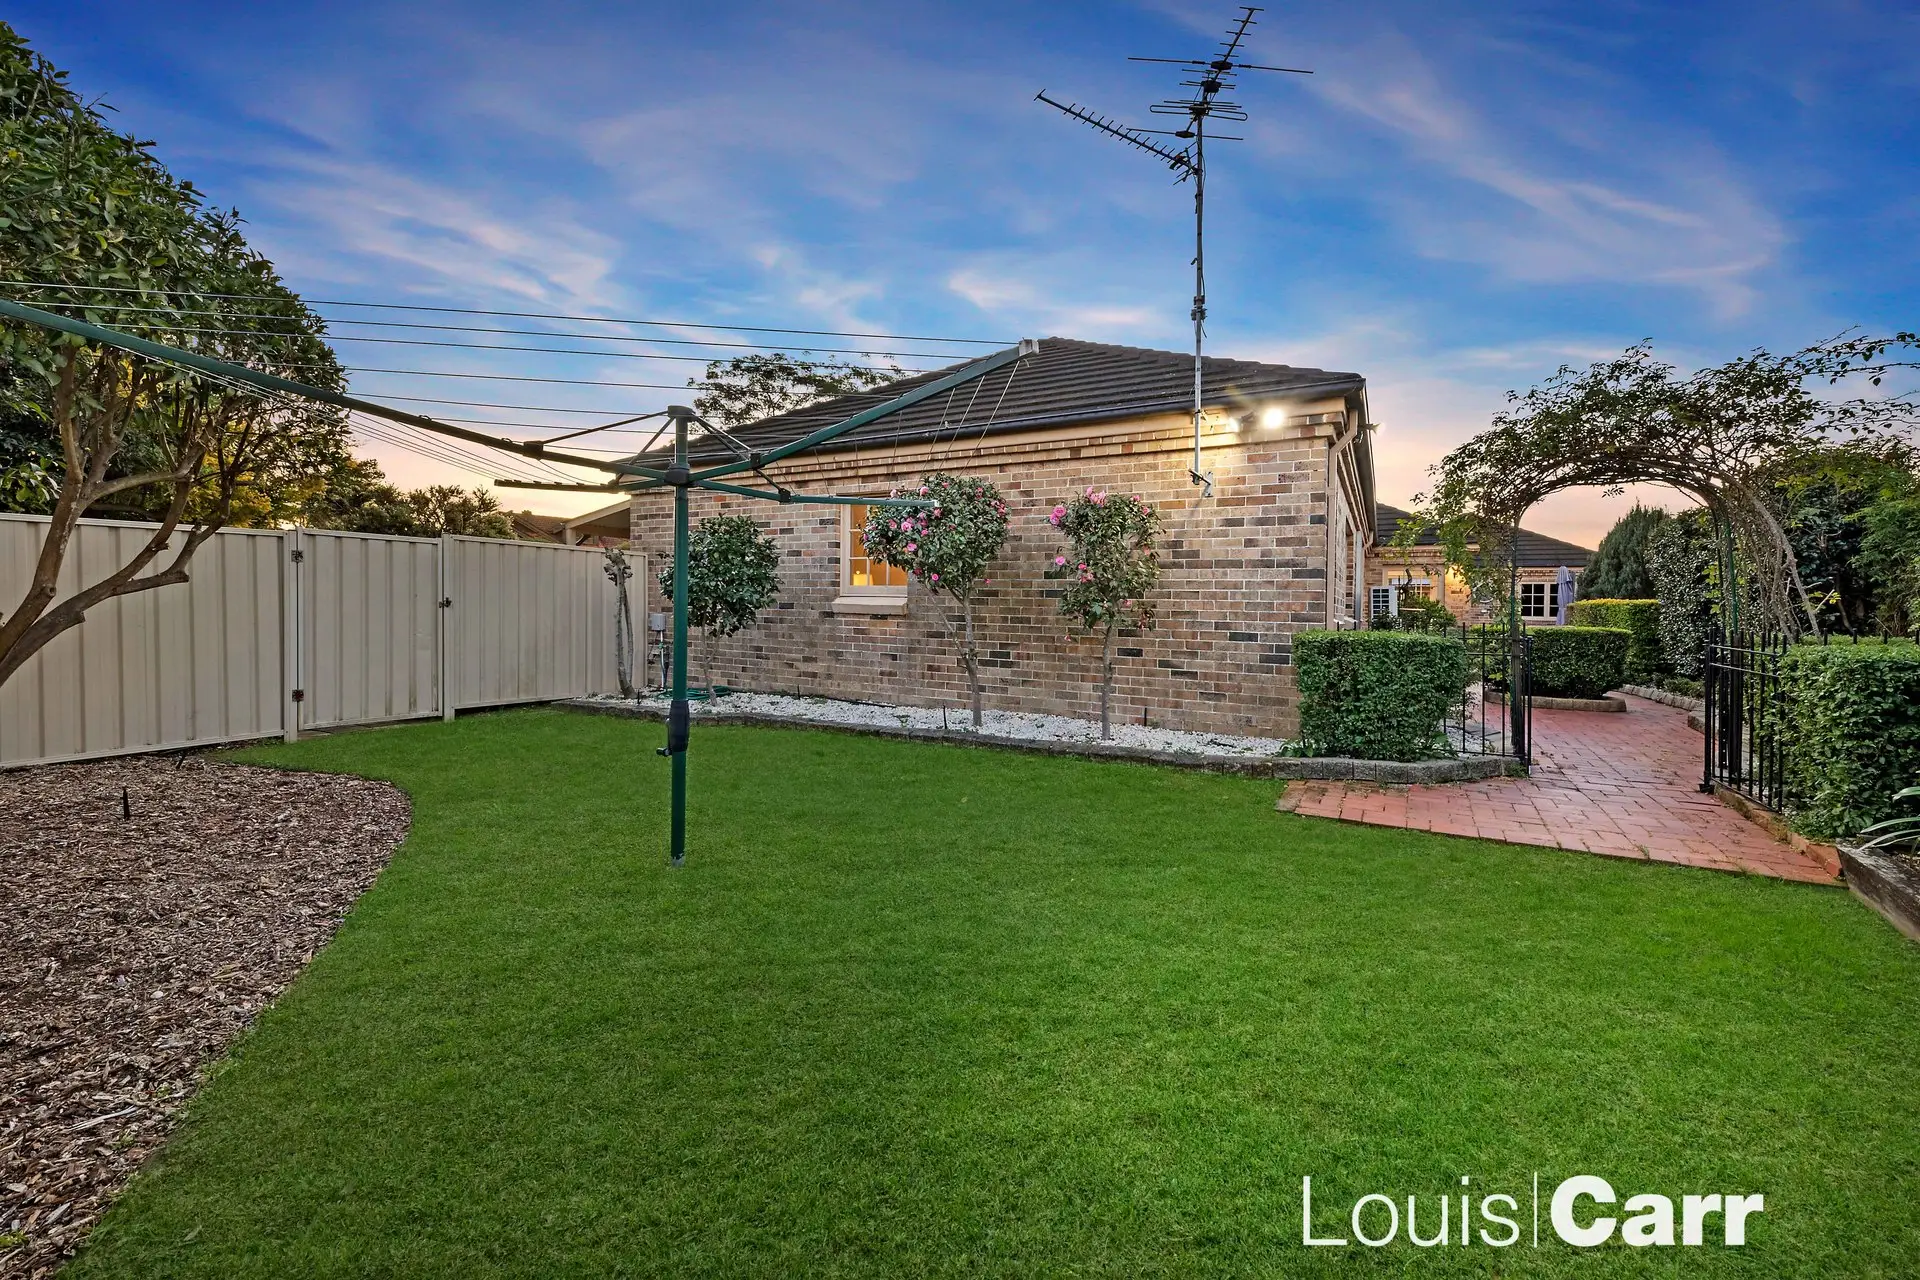 Photo #13: 32 Fullers Road, Glenhaven - Sold by Louis Carr Real Estate